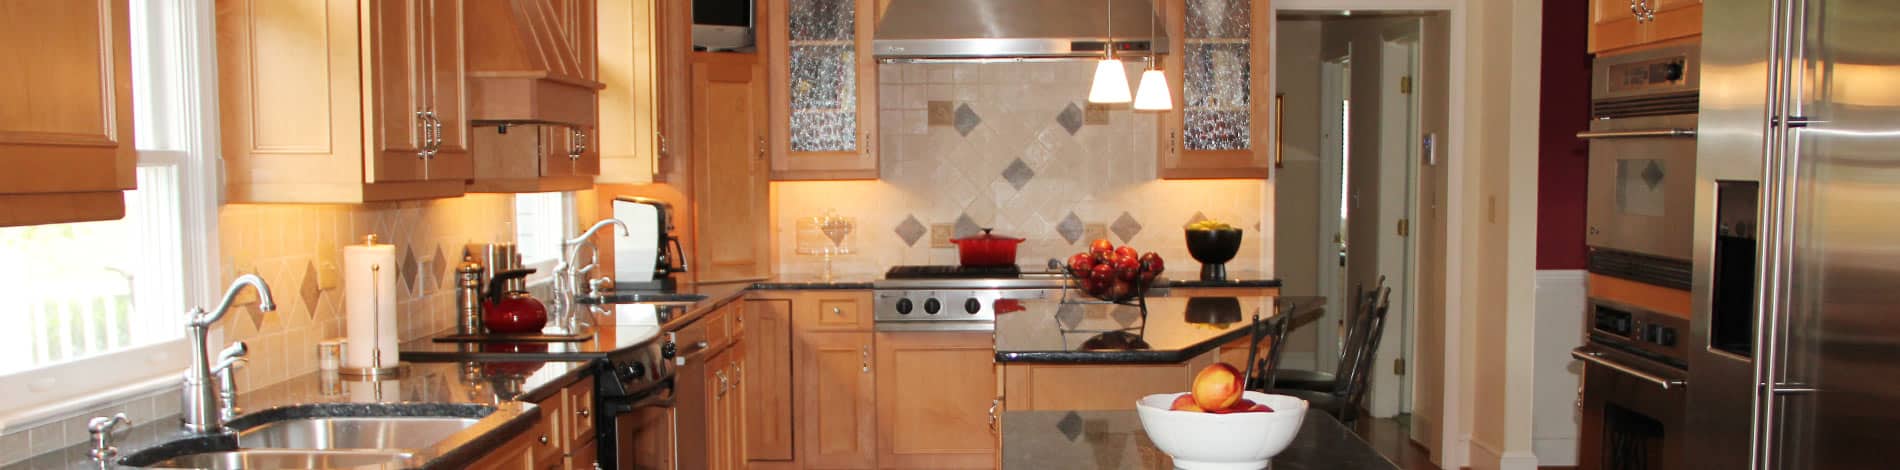 3 Kitchen Remodeling Myths You Need To Know